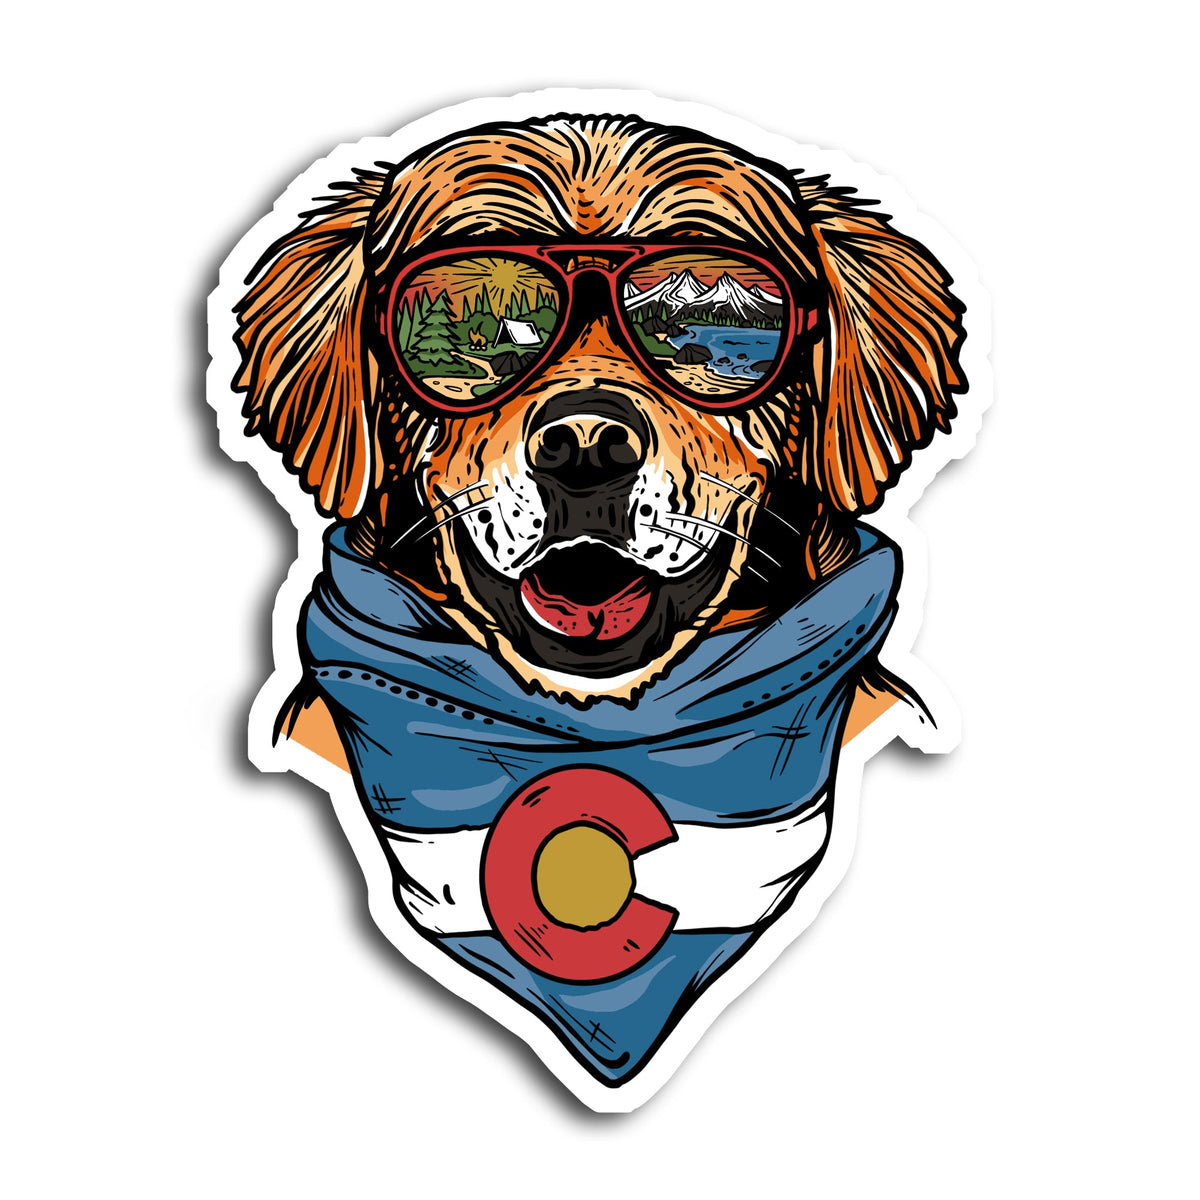 Durable Stickers - Camp, Beach, Dogs, Outdoor, Nature, State, Wildlife